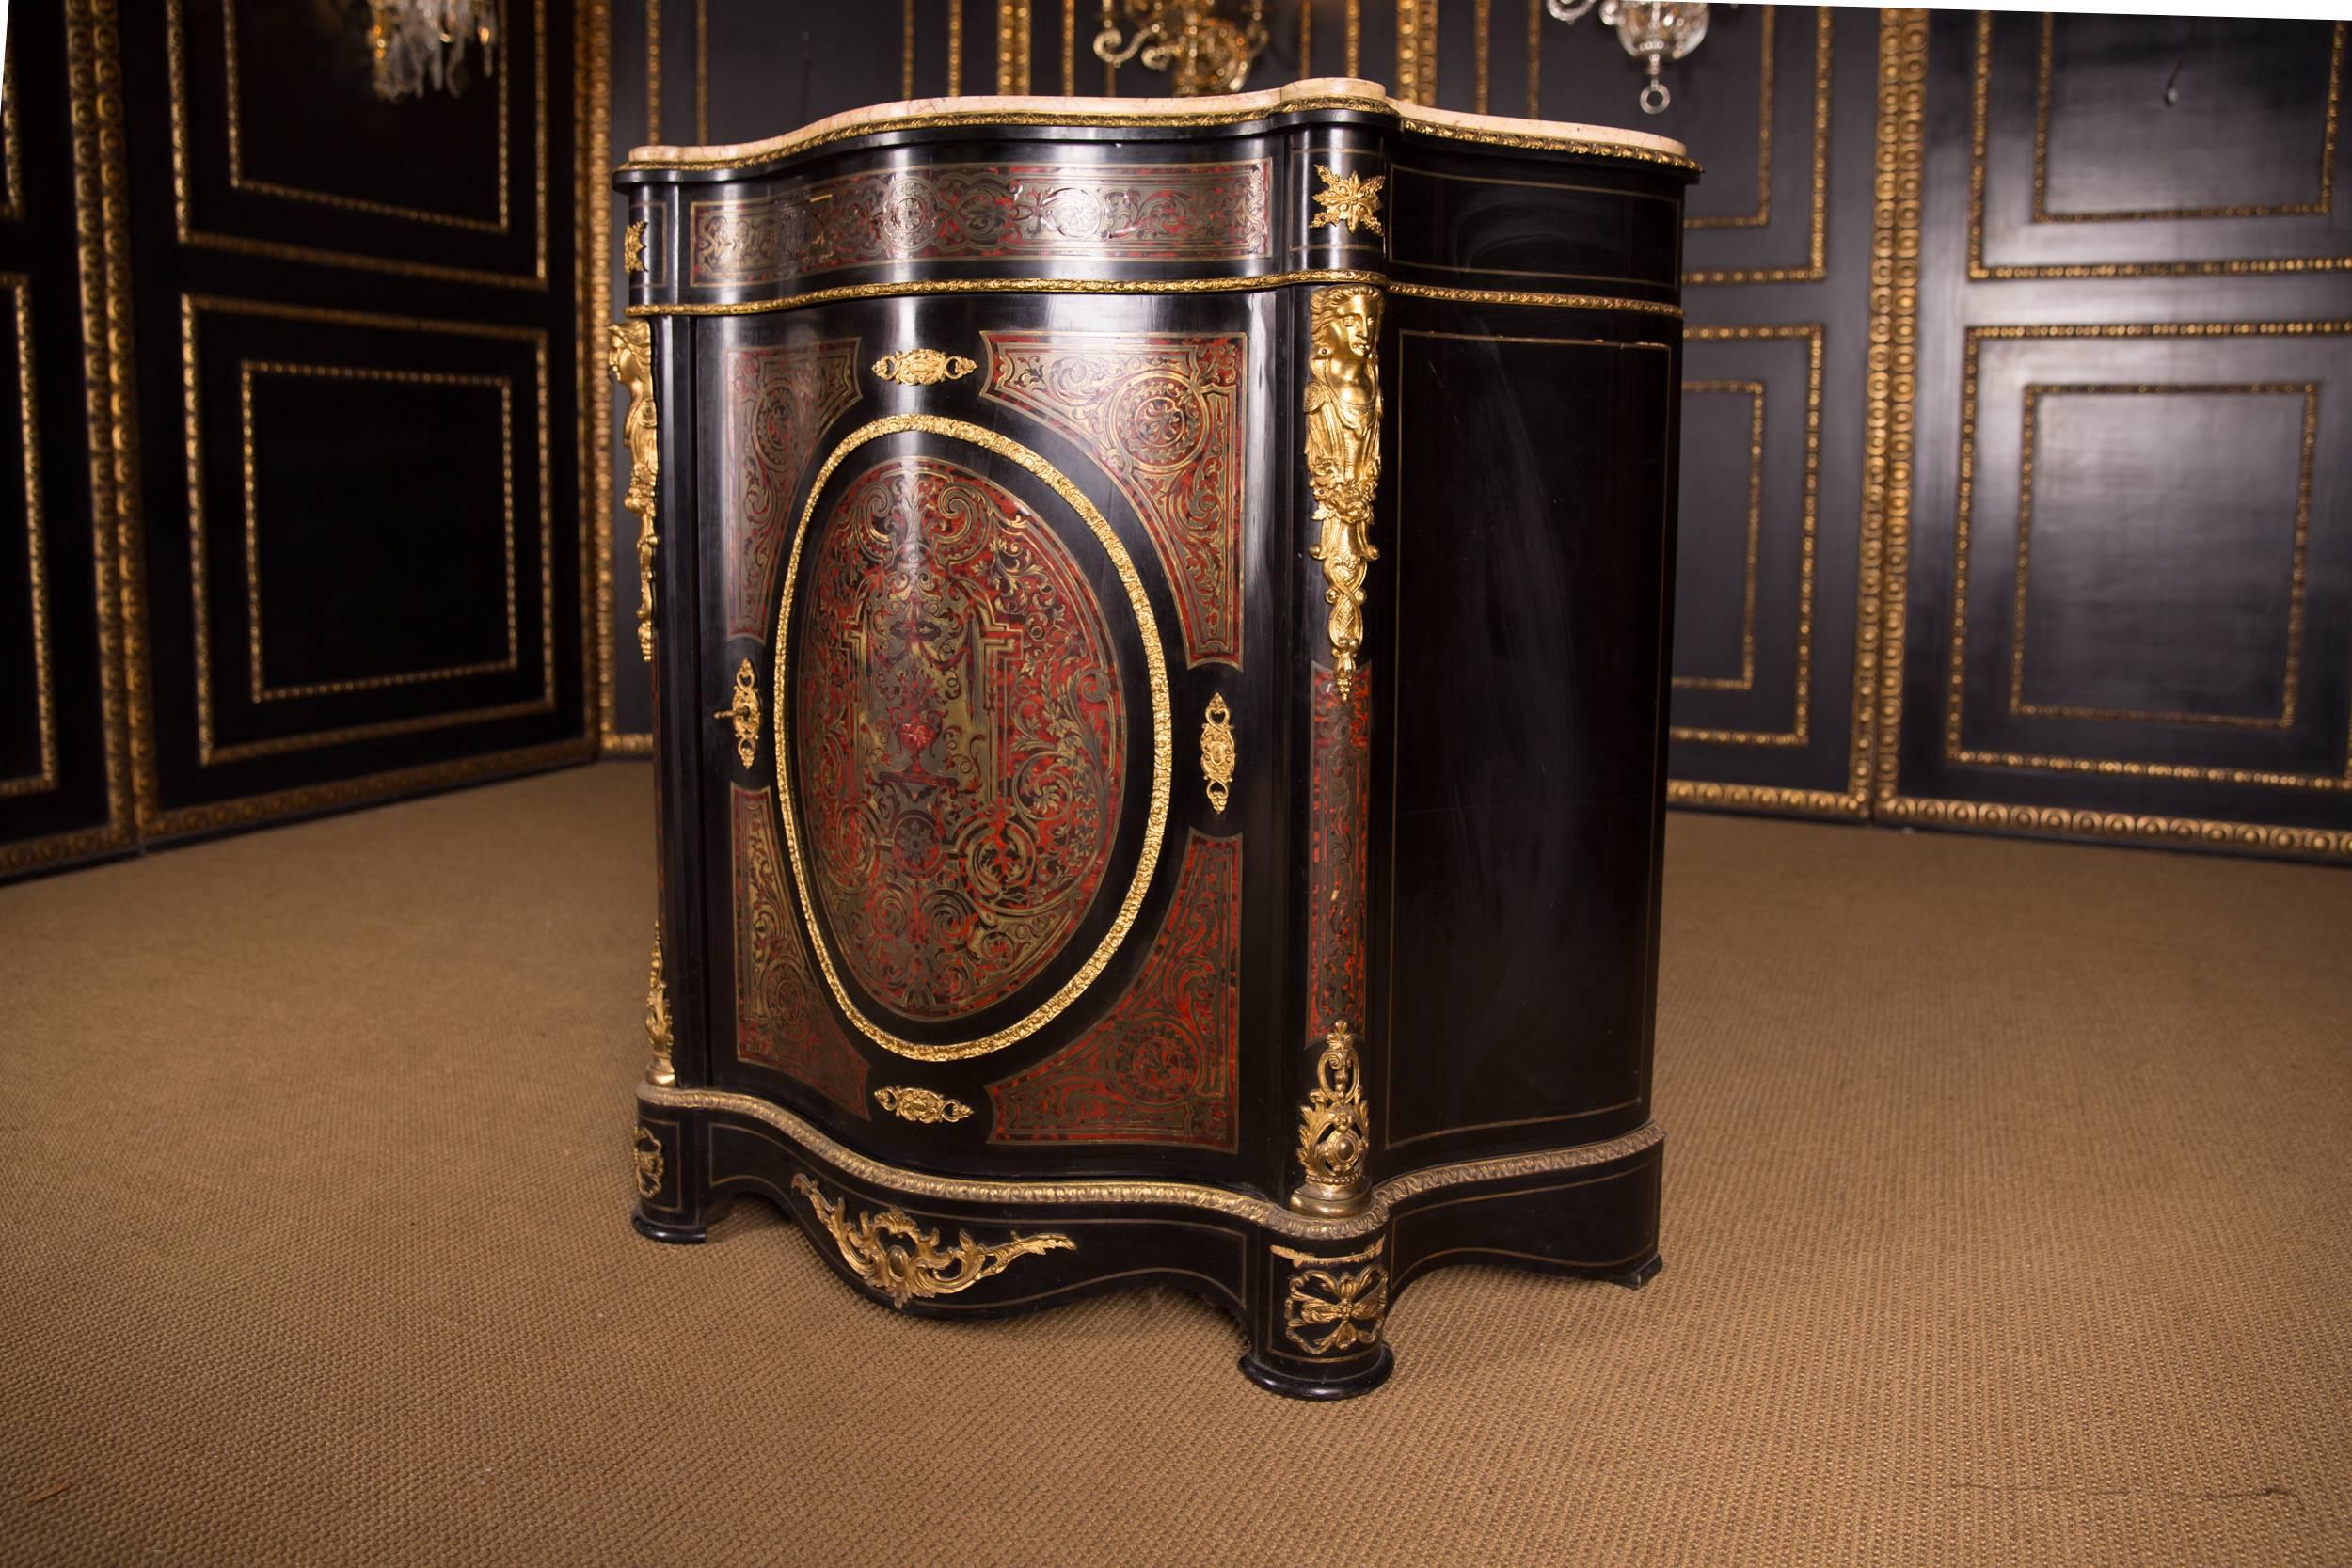 19th Century Original French Boulle Commode in the Louis XV Style 1860 (Boullemarketerie)